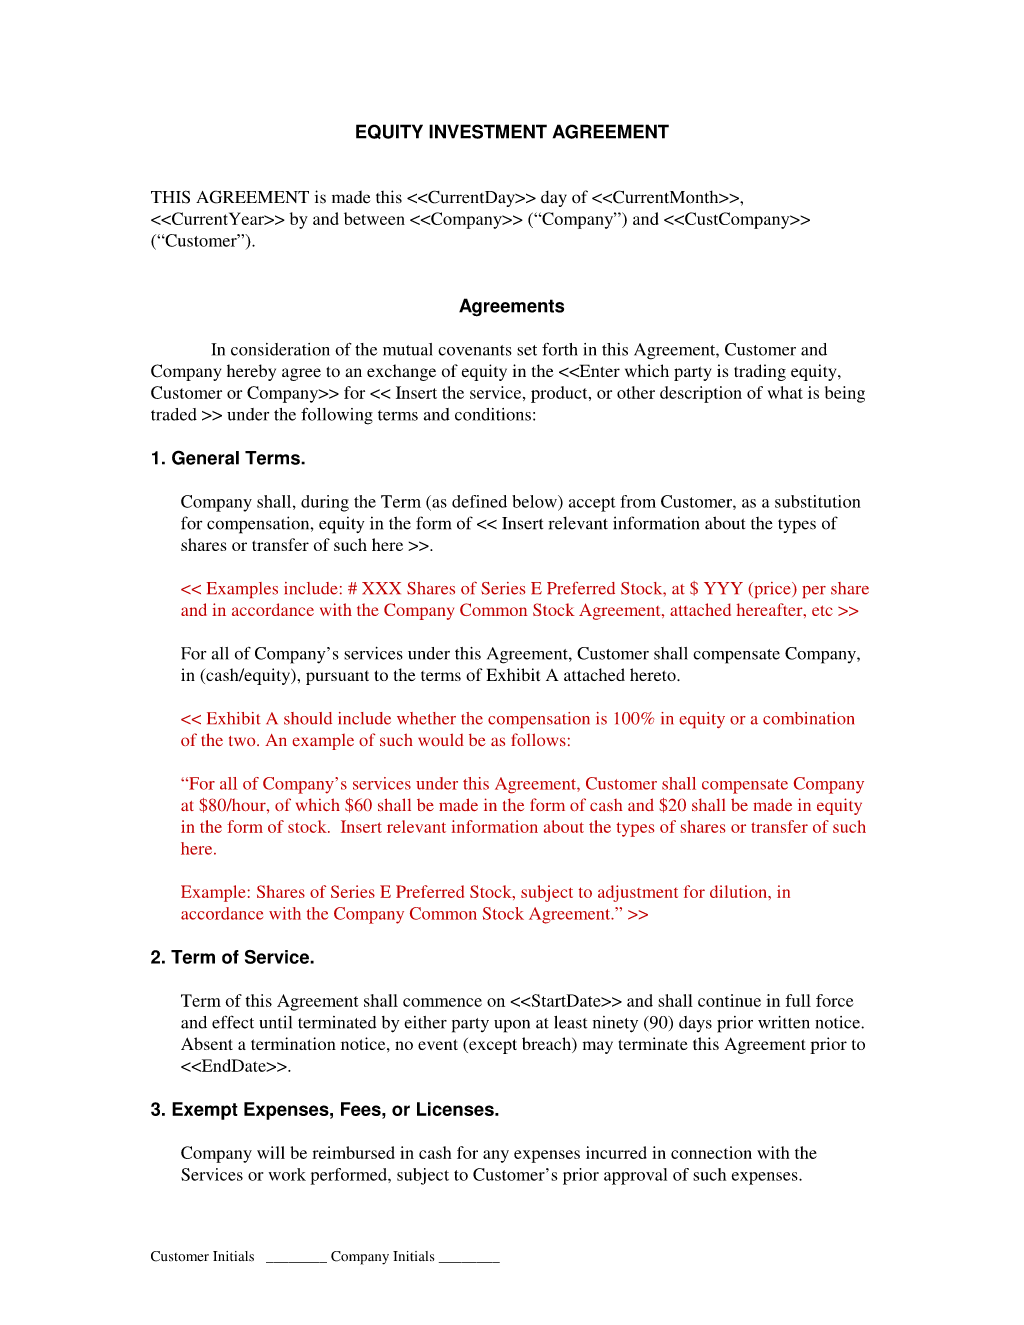 investment-agreement-template-1-1